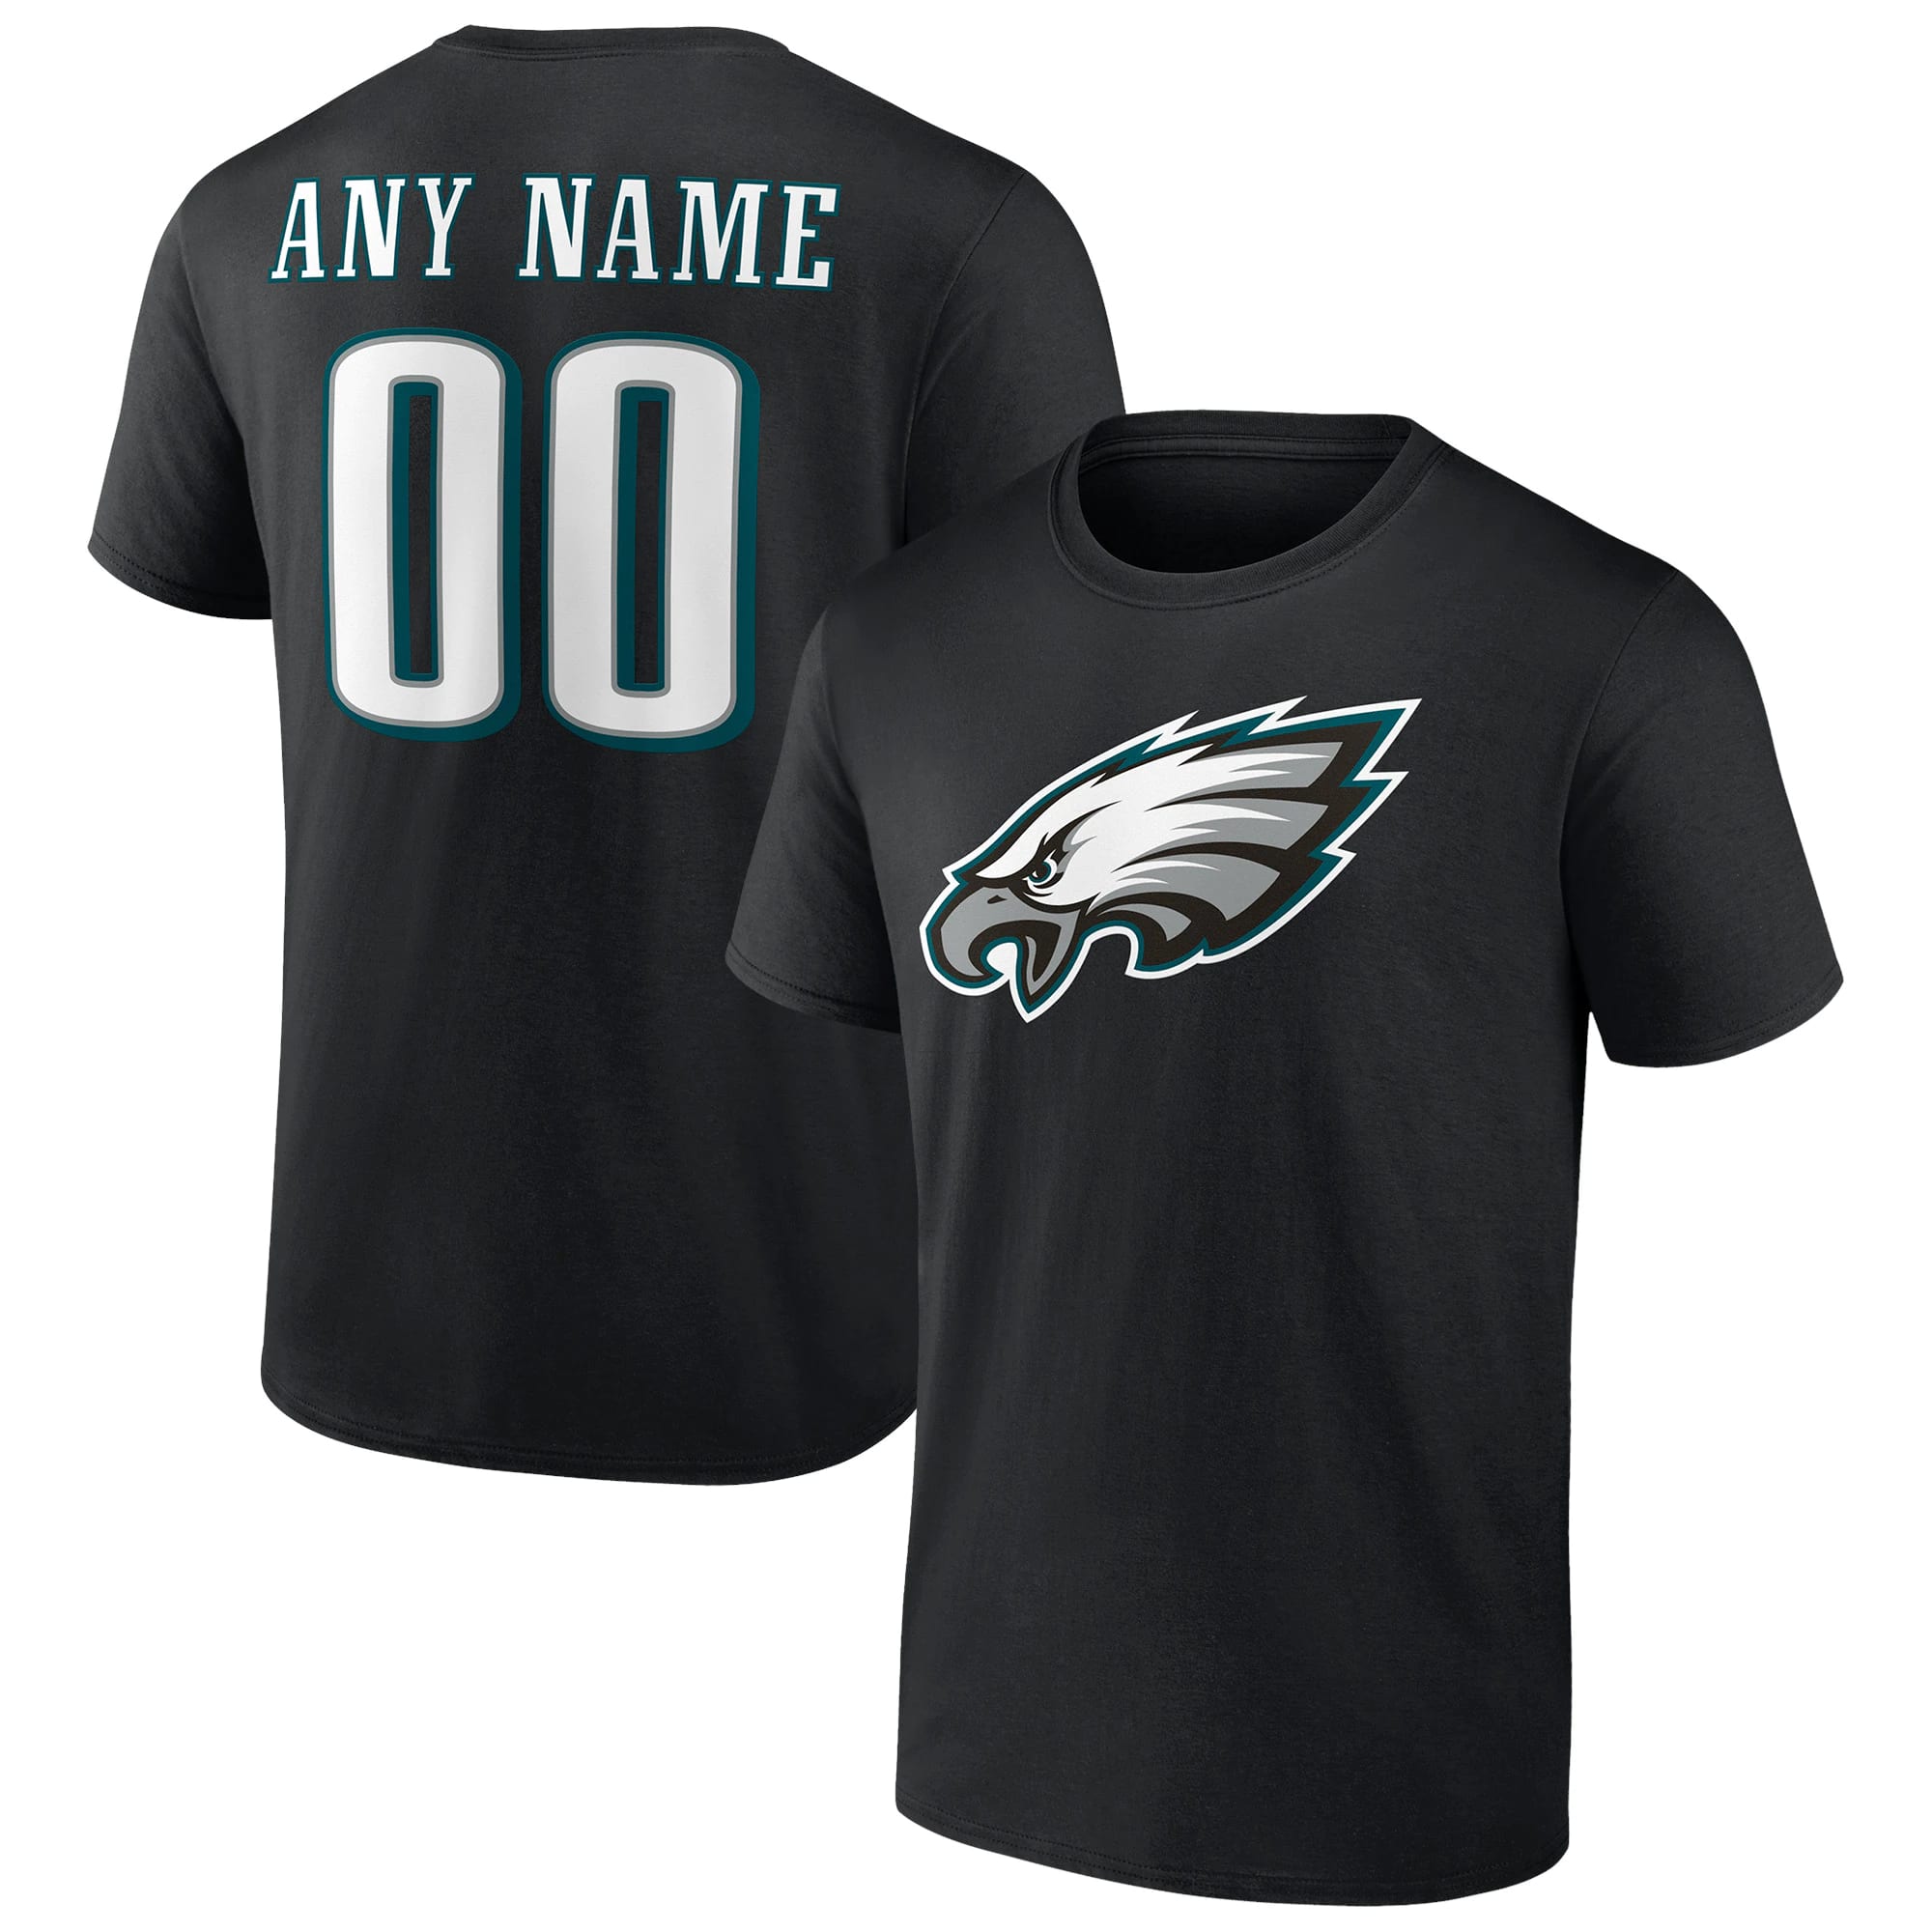 Philadelphia Eagles Fanatics Branded Team Authentic Personalized Name & Number Black T-shirt